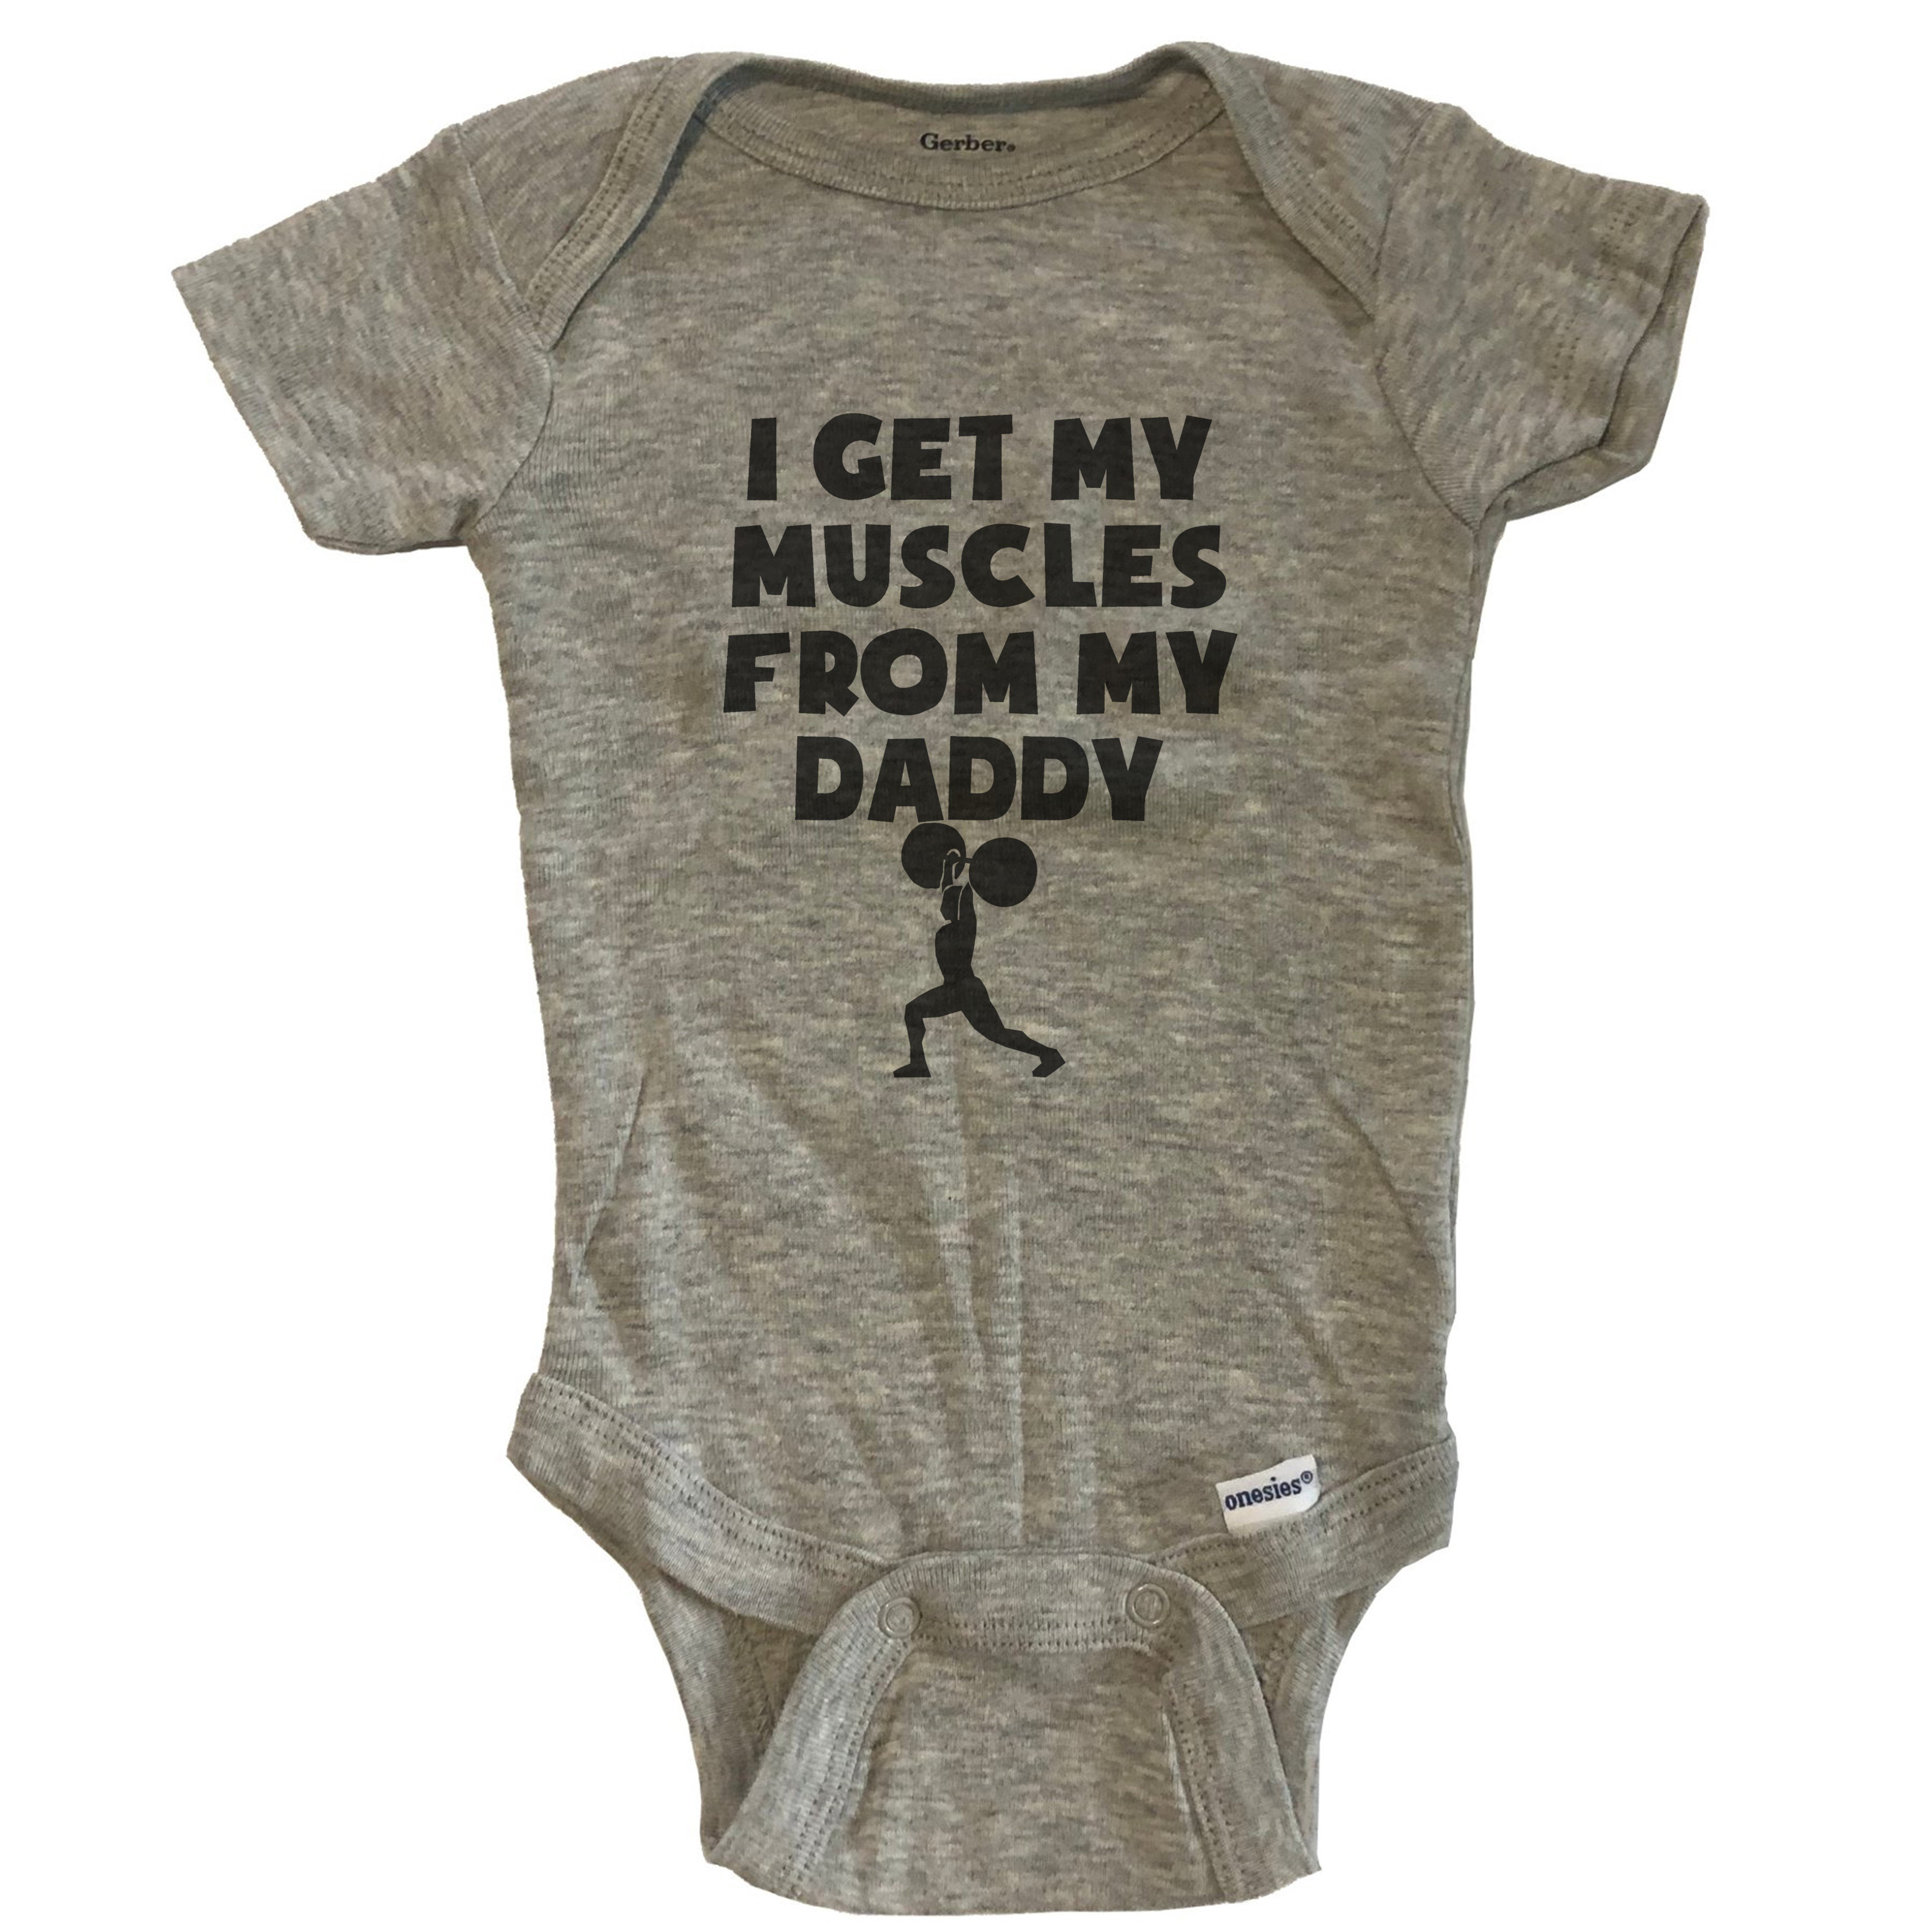 I Get My Muscles from my Daddy Sleepsuit Boys Girls Romper 